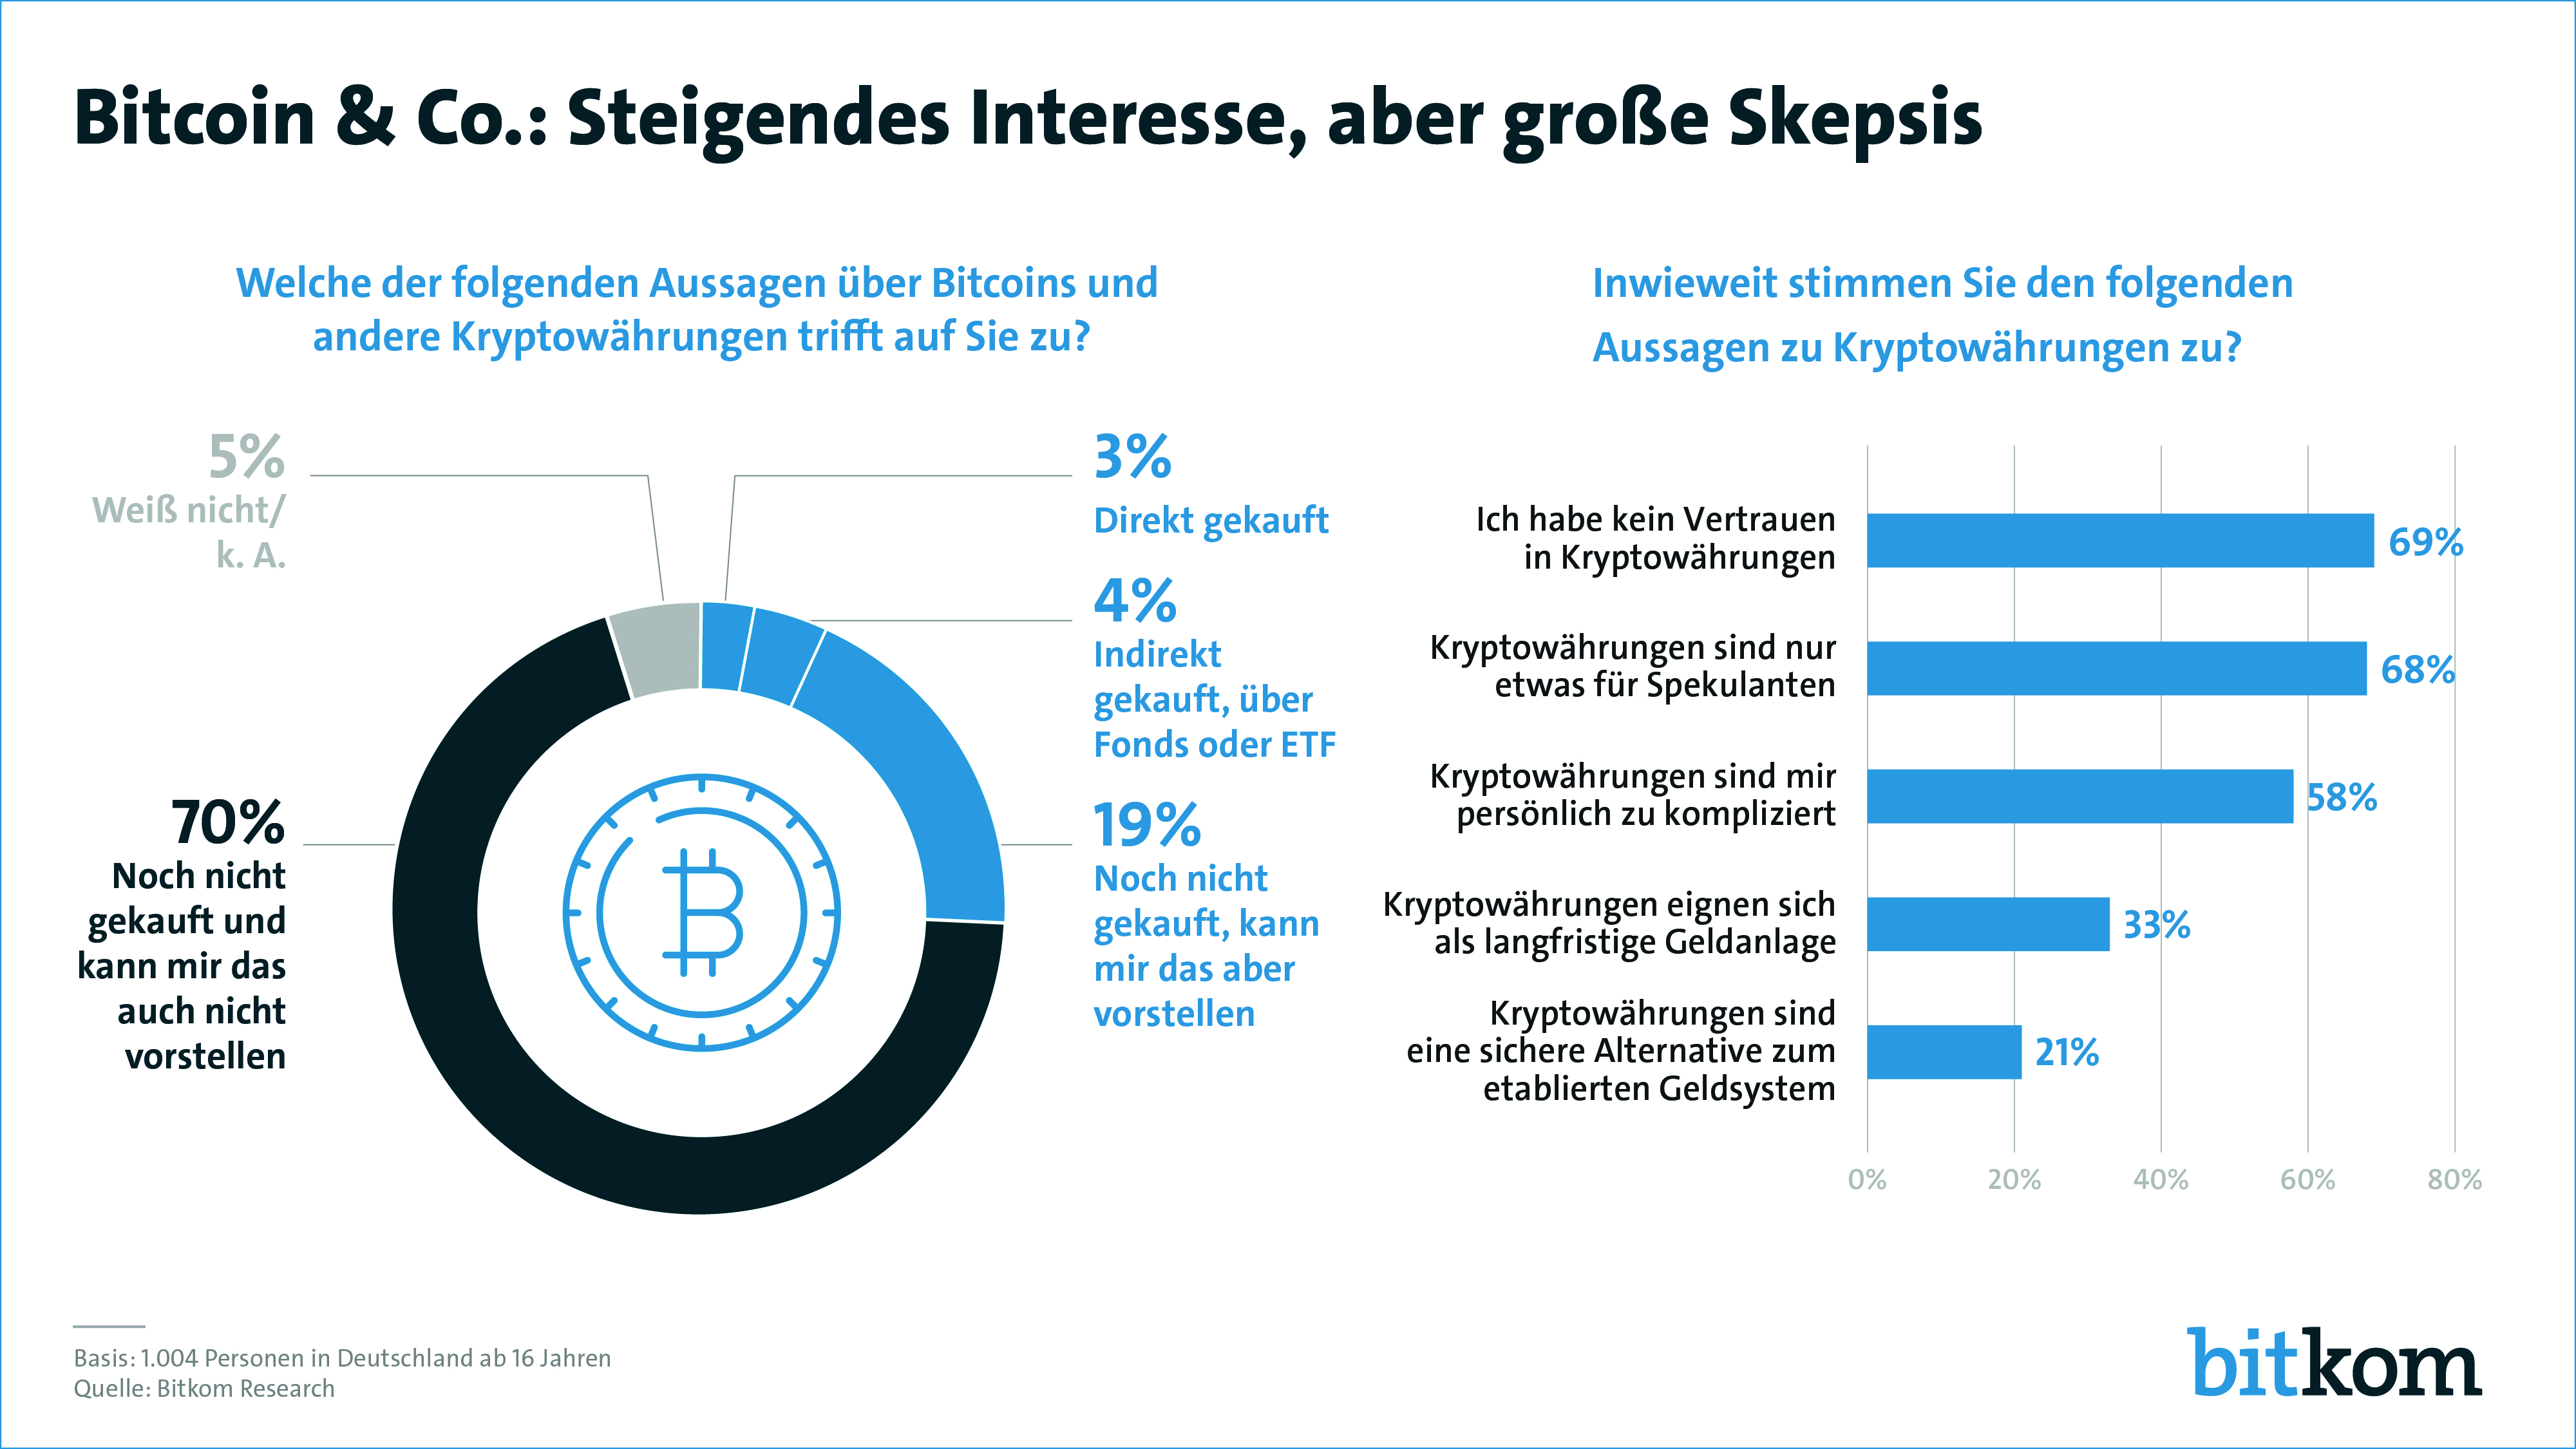 in bitcoin investieren scalable capital